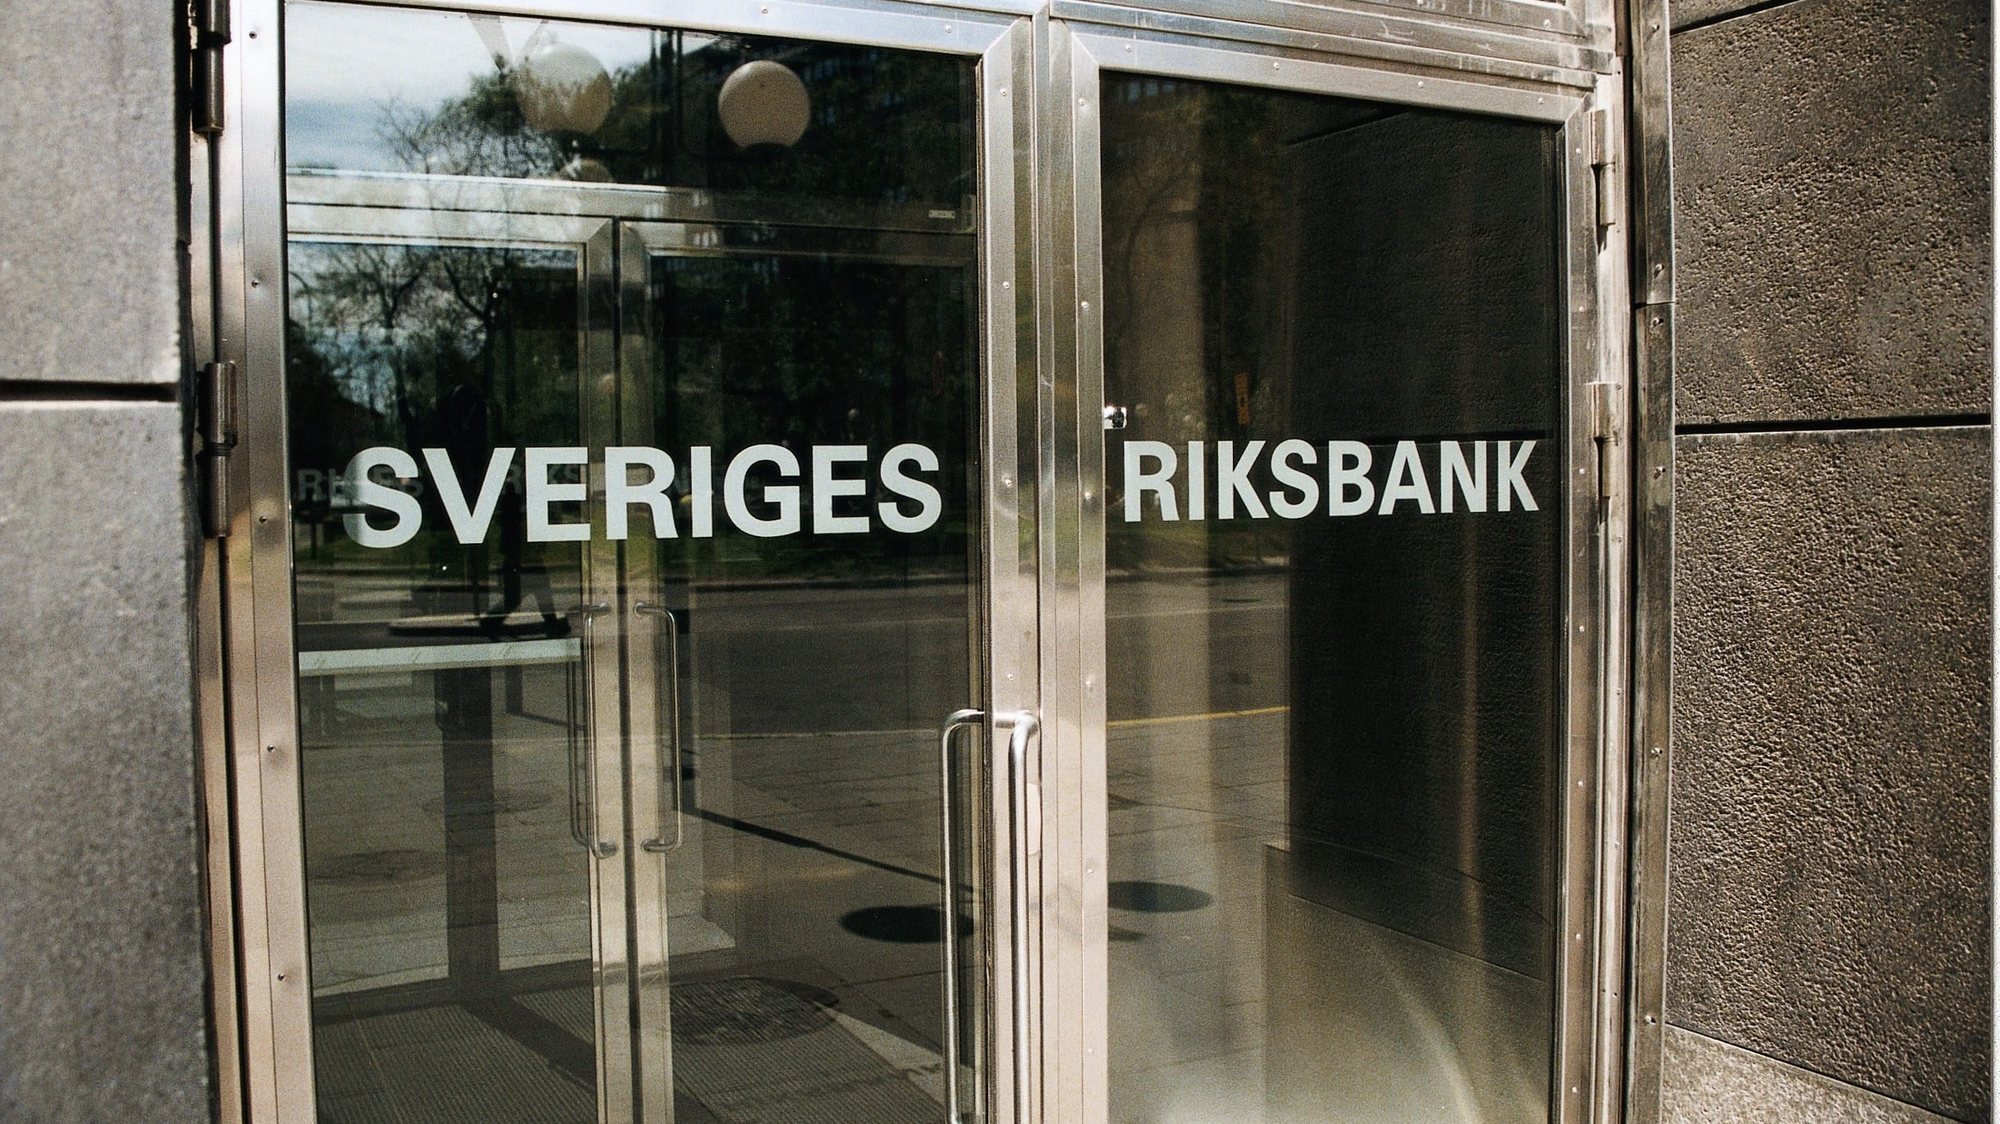 epa05154506 A undated handout image made available by Sweden&#039;s central bank, Sveriges Riksbank showing the main entrance of the central bank building in Stockholm, Sweden. The Swedish central bank 11 February 2016 cut its key repo rate by 0.15 percentage points to a record low of minus 0.50 per cent in a bid to support a rise in inflation. Sweden&#039;s inflation rate was 0.1 per cent in December, according to the country&#039;s statistics agency. The central bank&#039;s inflation target is 2 per cent. The central bank, known as the Riksbank, projected inflation to be 0.7 per cent in 2016, lower than its December estimate of 1.3 per cent. Lower energy prices and low rent increases were contributing factors. In addition to safeguarding its inflation target, the cuts were also necessary amid uncertainty regarding global developments and moves by other central banks, the Riksbank said. The repo rate is the interest rate that commercial banks get when they deposit money for seven days at the Riksbank. A negative rate means banks have to pay money for keeping deposits with the central bank. Many analysts had expected the interest rate cut.  EPA/SVERIGES RIKSBANK / HANDOUT  HANDOUT EDITORIAL USE ONLY/NO SALES